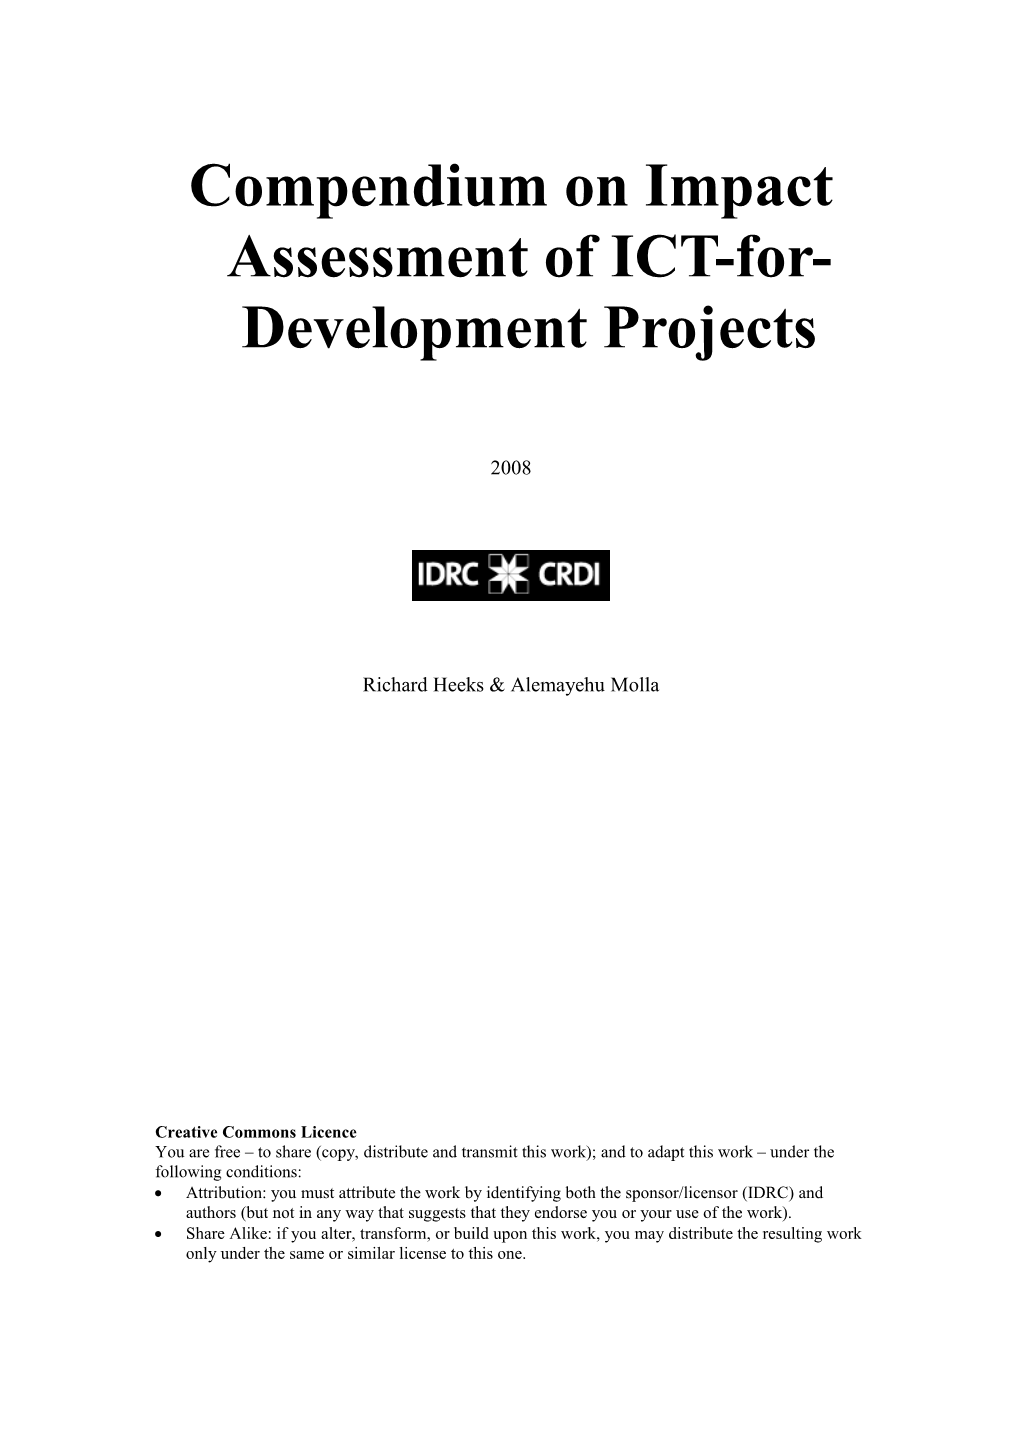 Compendium on Impact Assessment of ICT-For-Development Projects